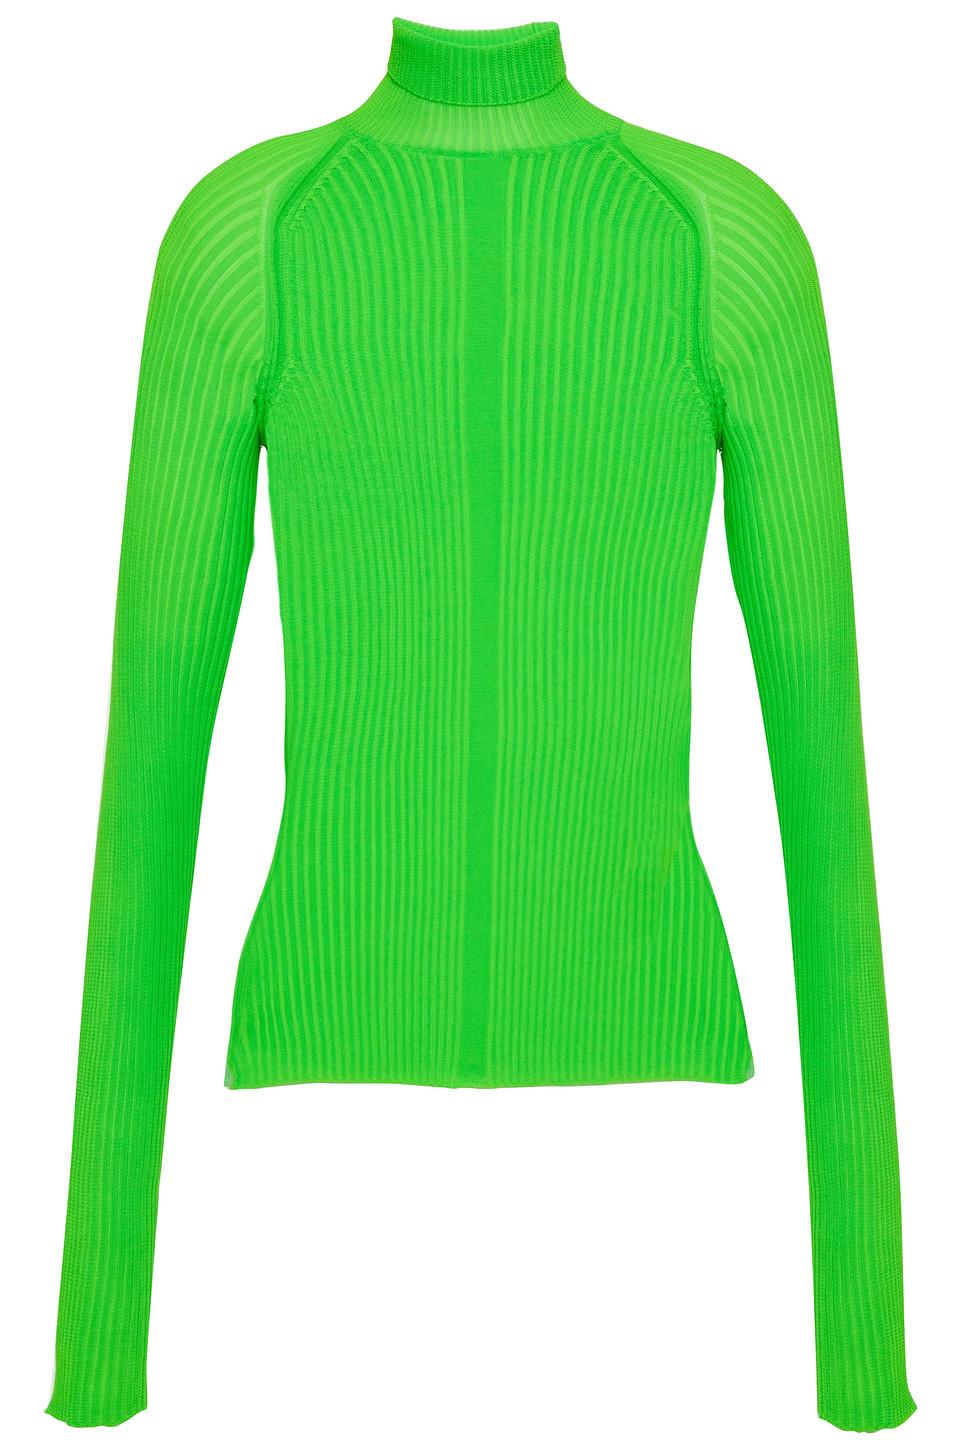 Acne Studios Neon Ribbed-knit Turtleneck Top in Green Lyst